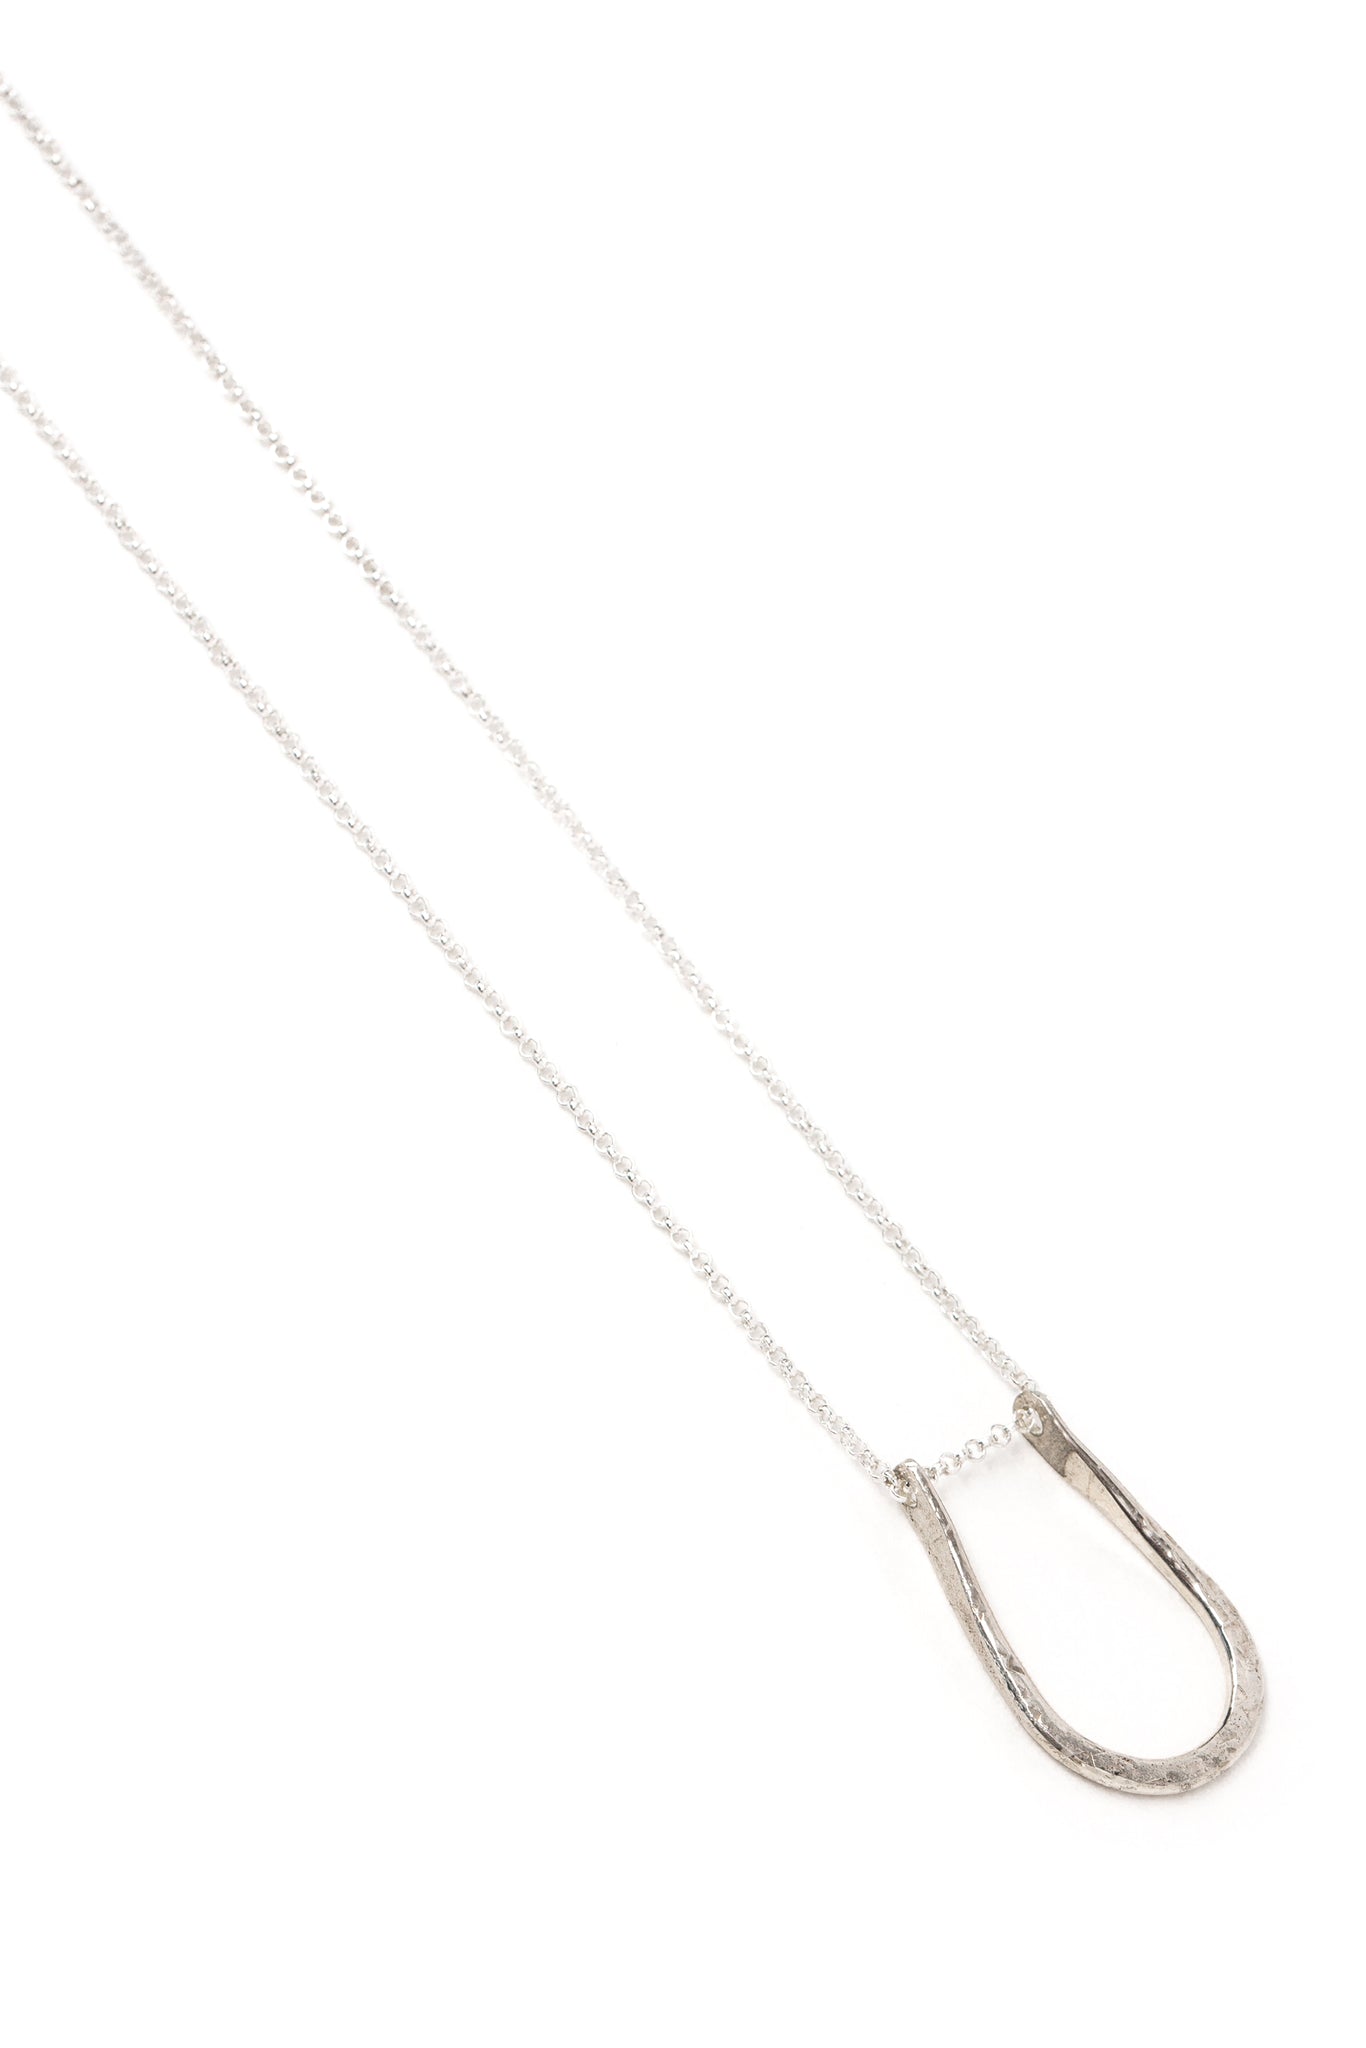 Silver Pinched “U” Necklace on a Silver Chain